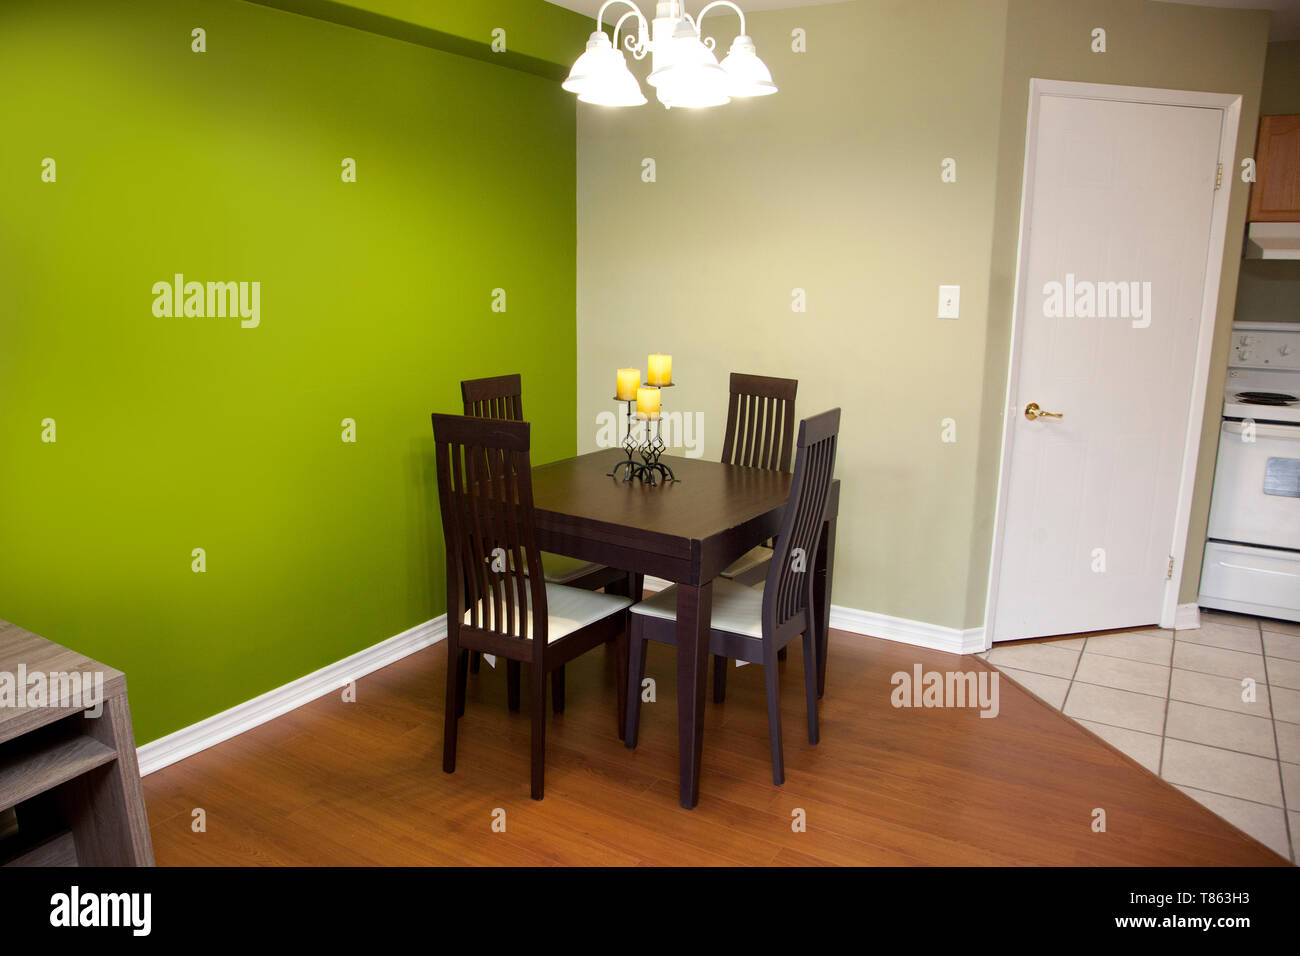 Green walls with a dark wood table and chair set for four in a kitchen or dining area of a home Stock Photo